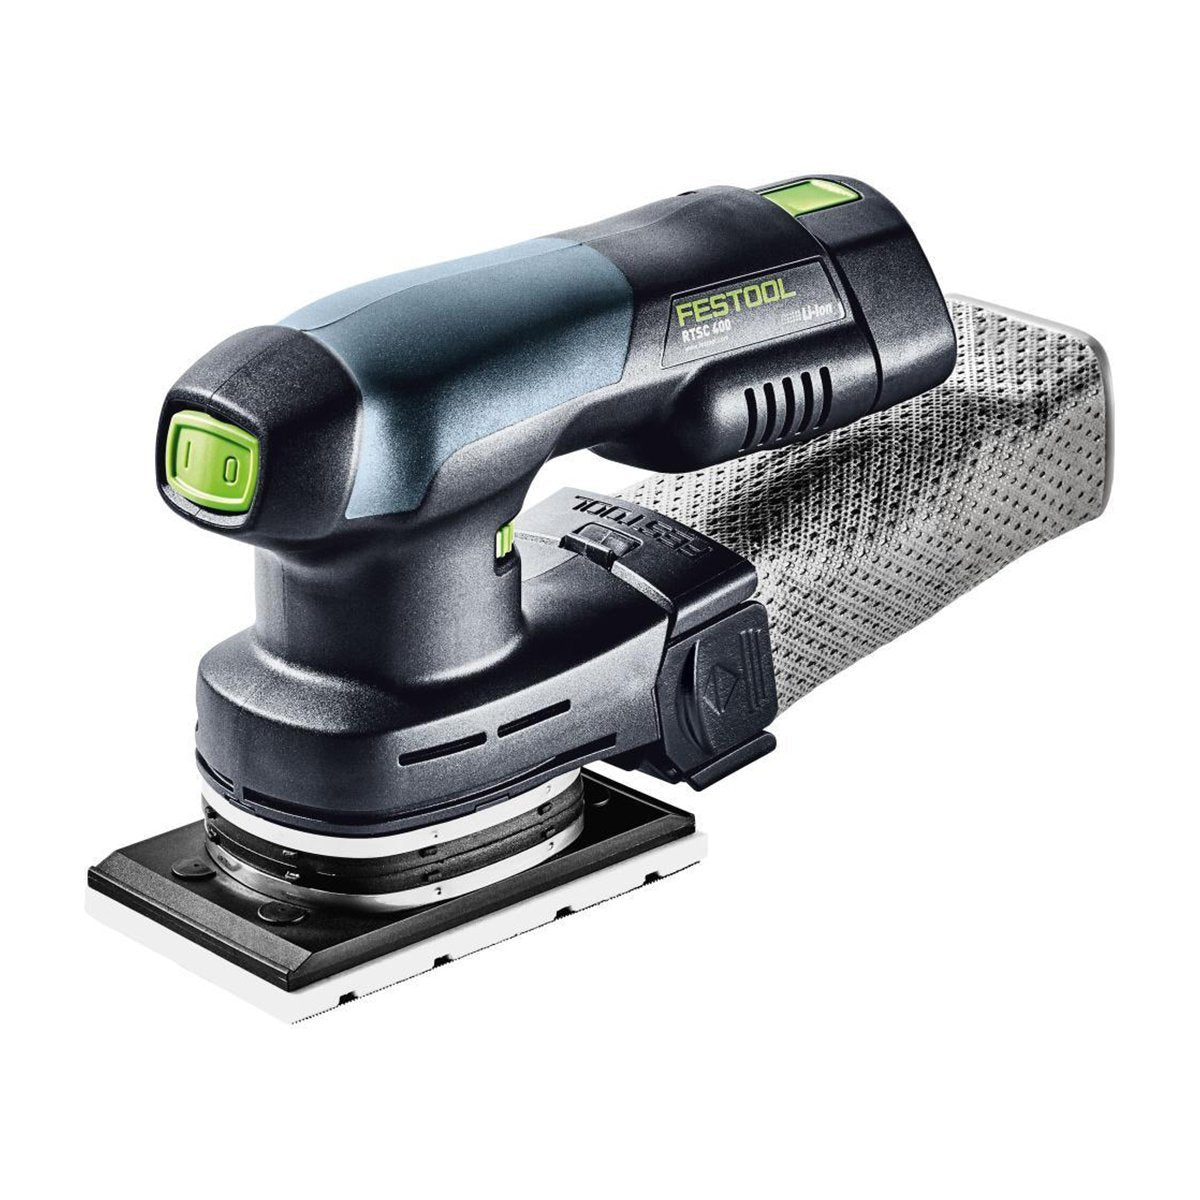 Festool RTSC 400 with ERGO battery and longlife dust bag installed is a compact and highly portable sander.